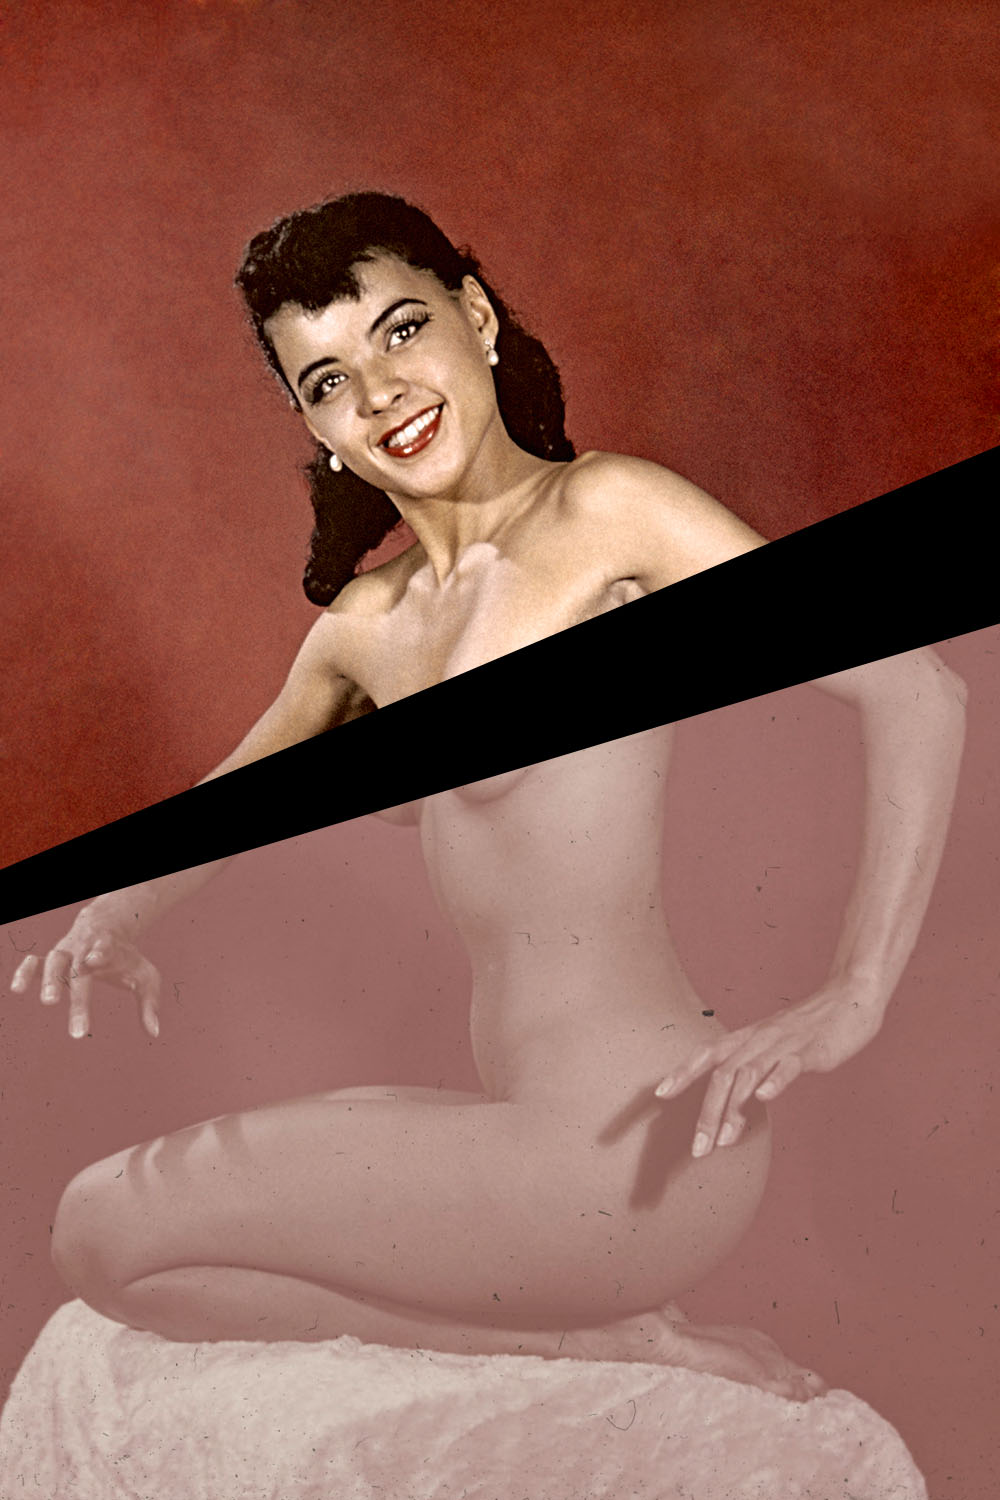 From The 1950s Nude Pinups - Nude Women of the 1950s - Restoring Pinups, Not Pornography